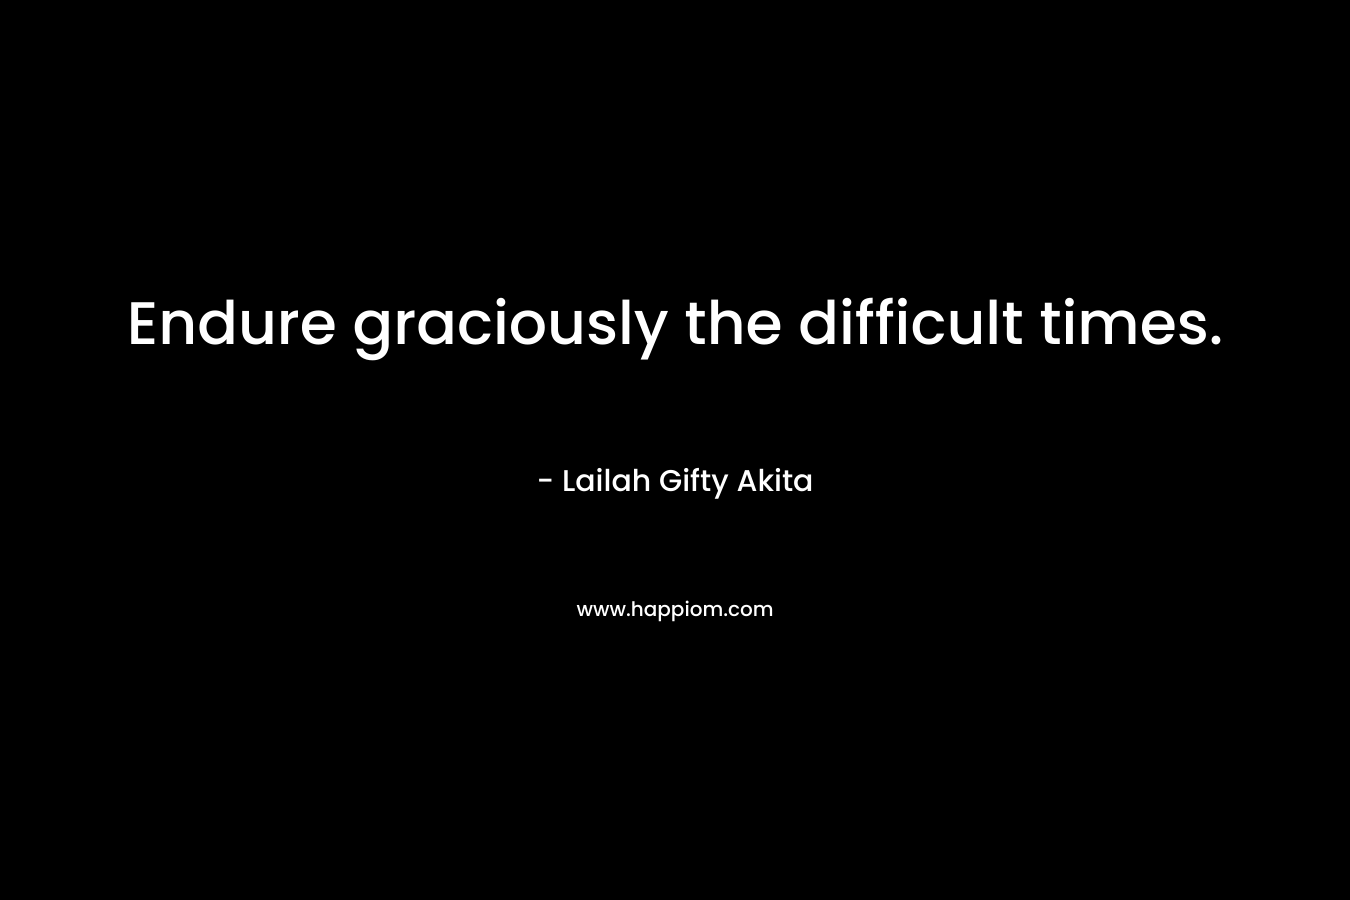 Endure graciously the difficult times.